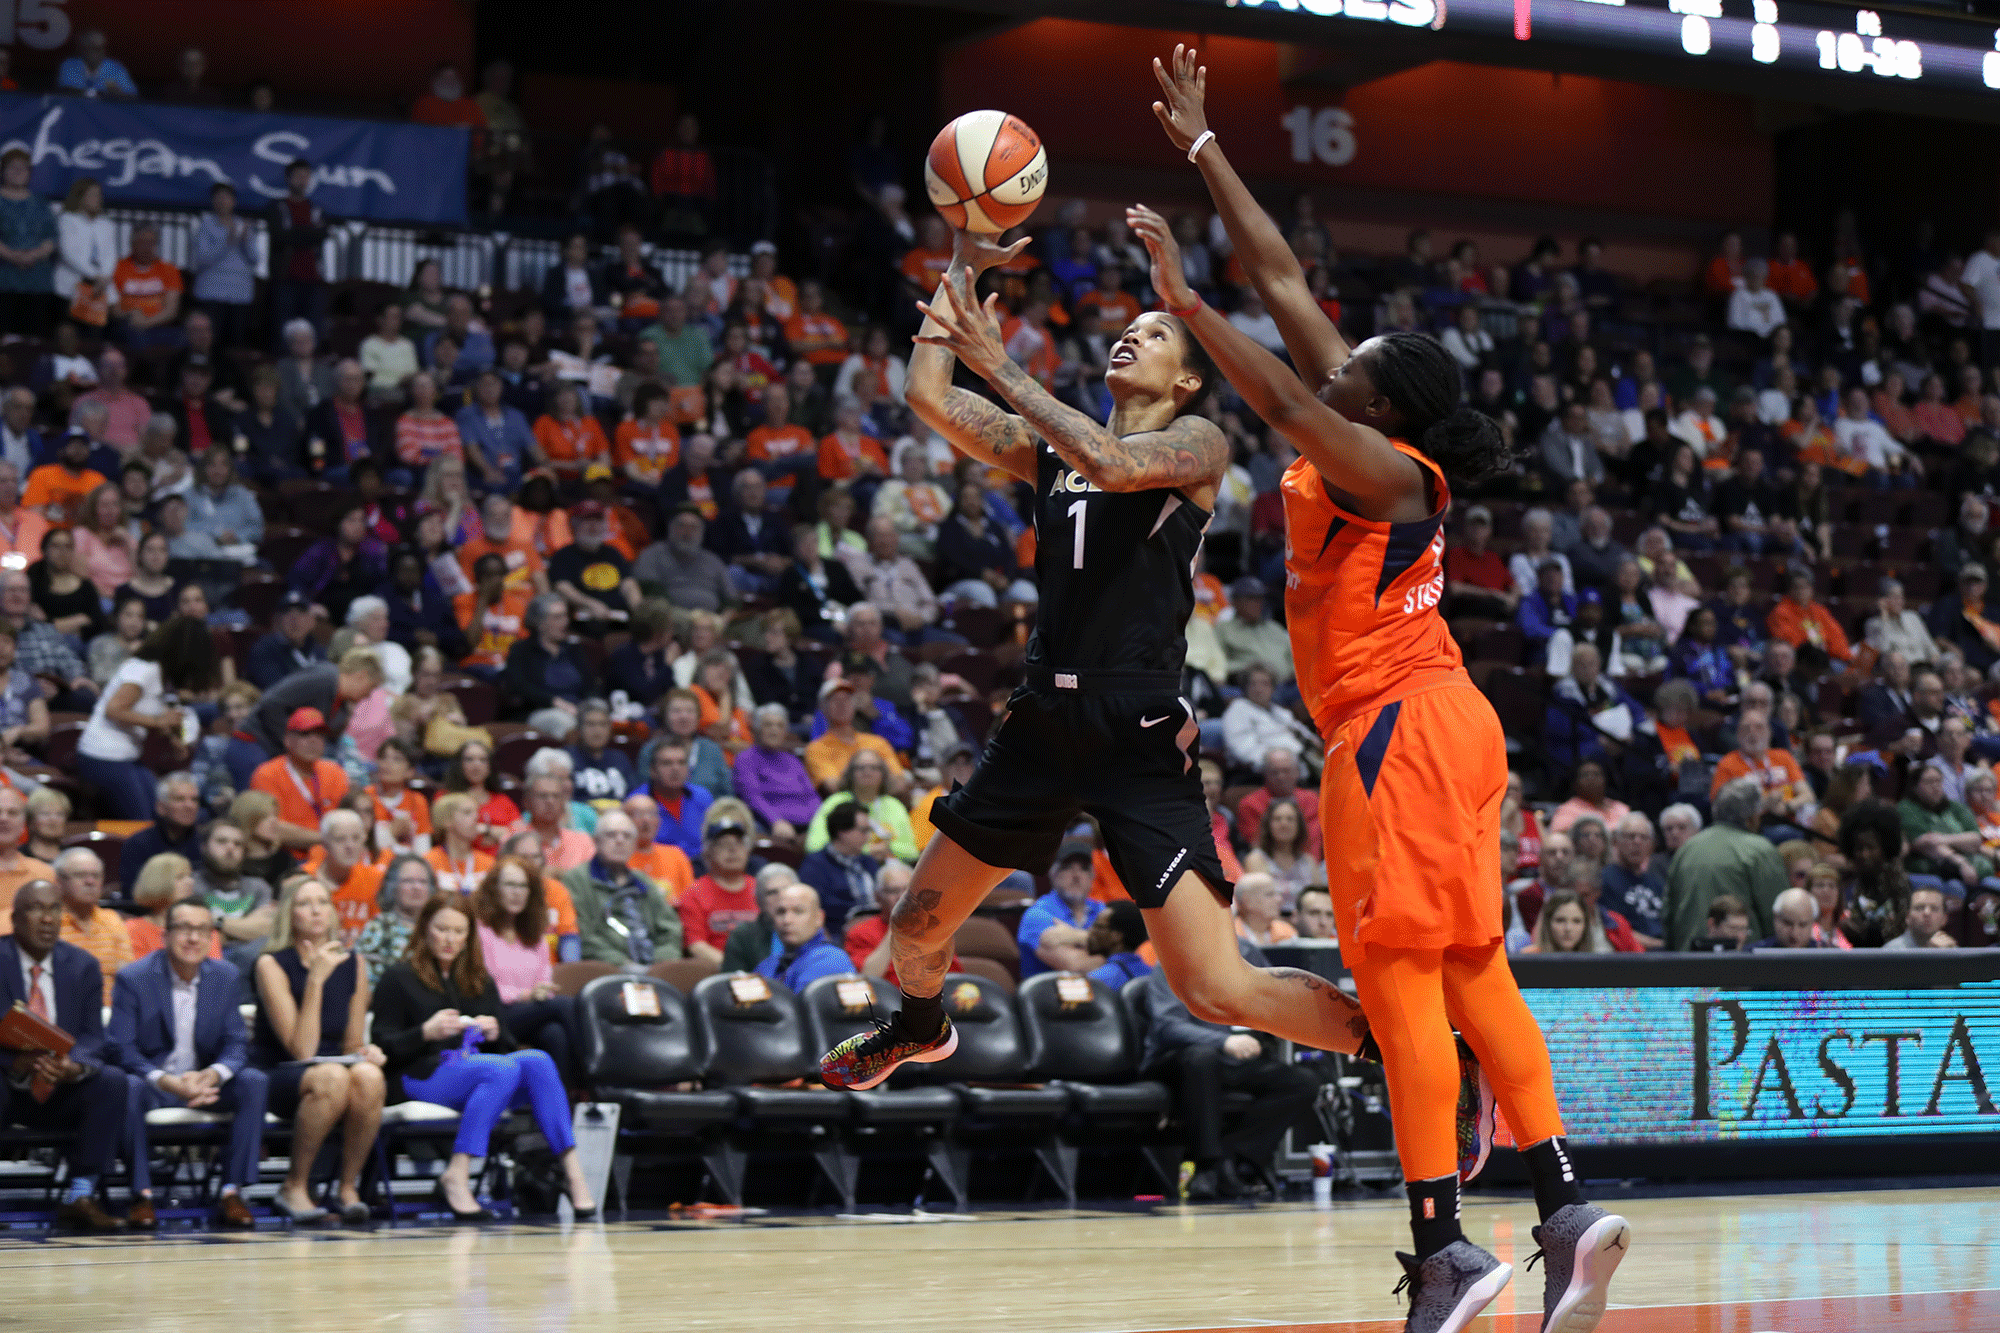 CBS Sports Network will join ESPN and NBA TV on the WNBA's network roster.